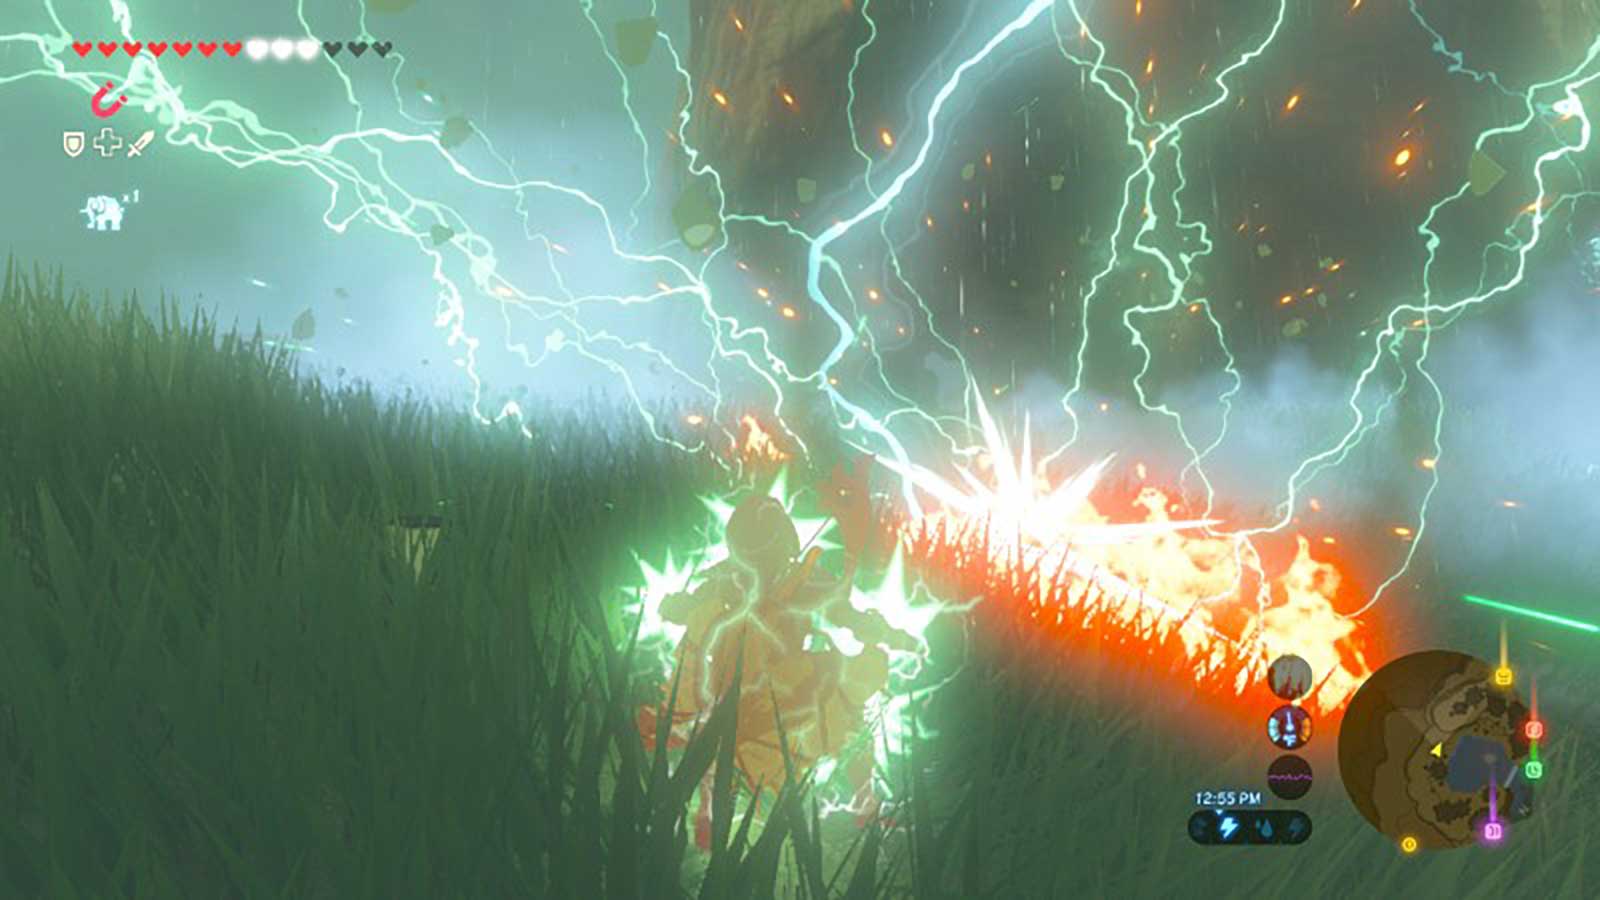 Link a few feet from a lightning strike that immediately causes a fire in the grass